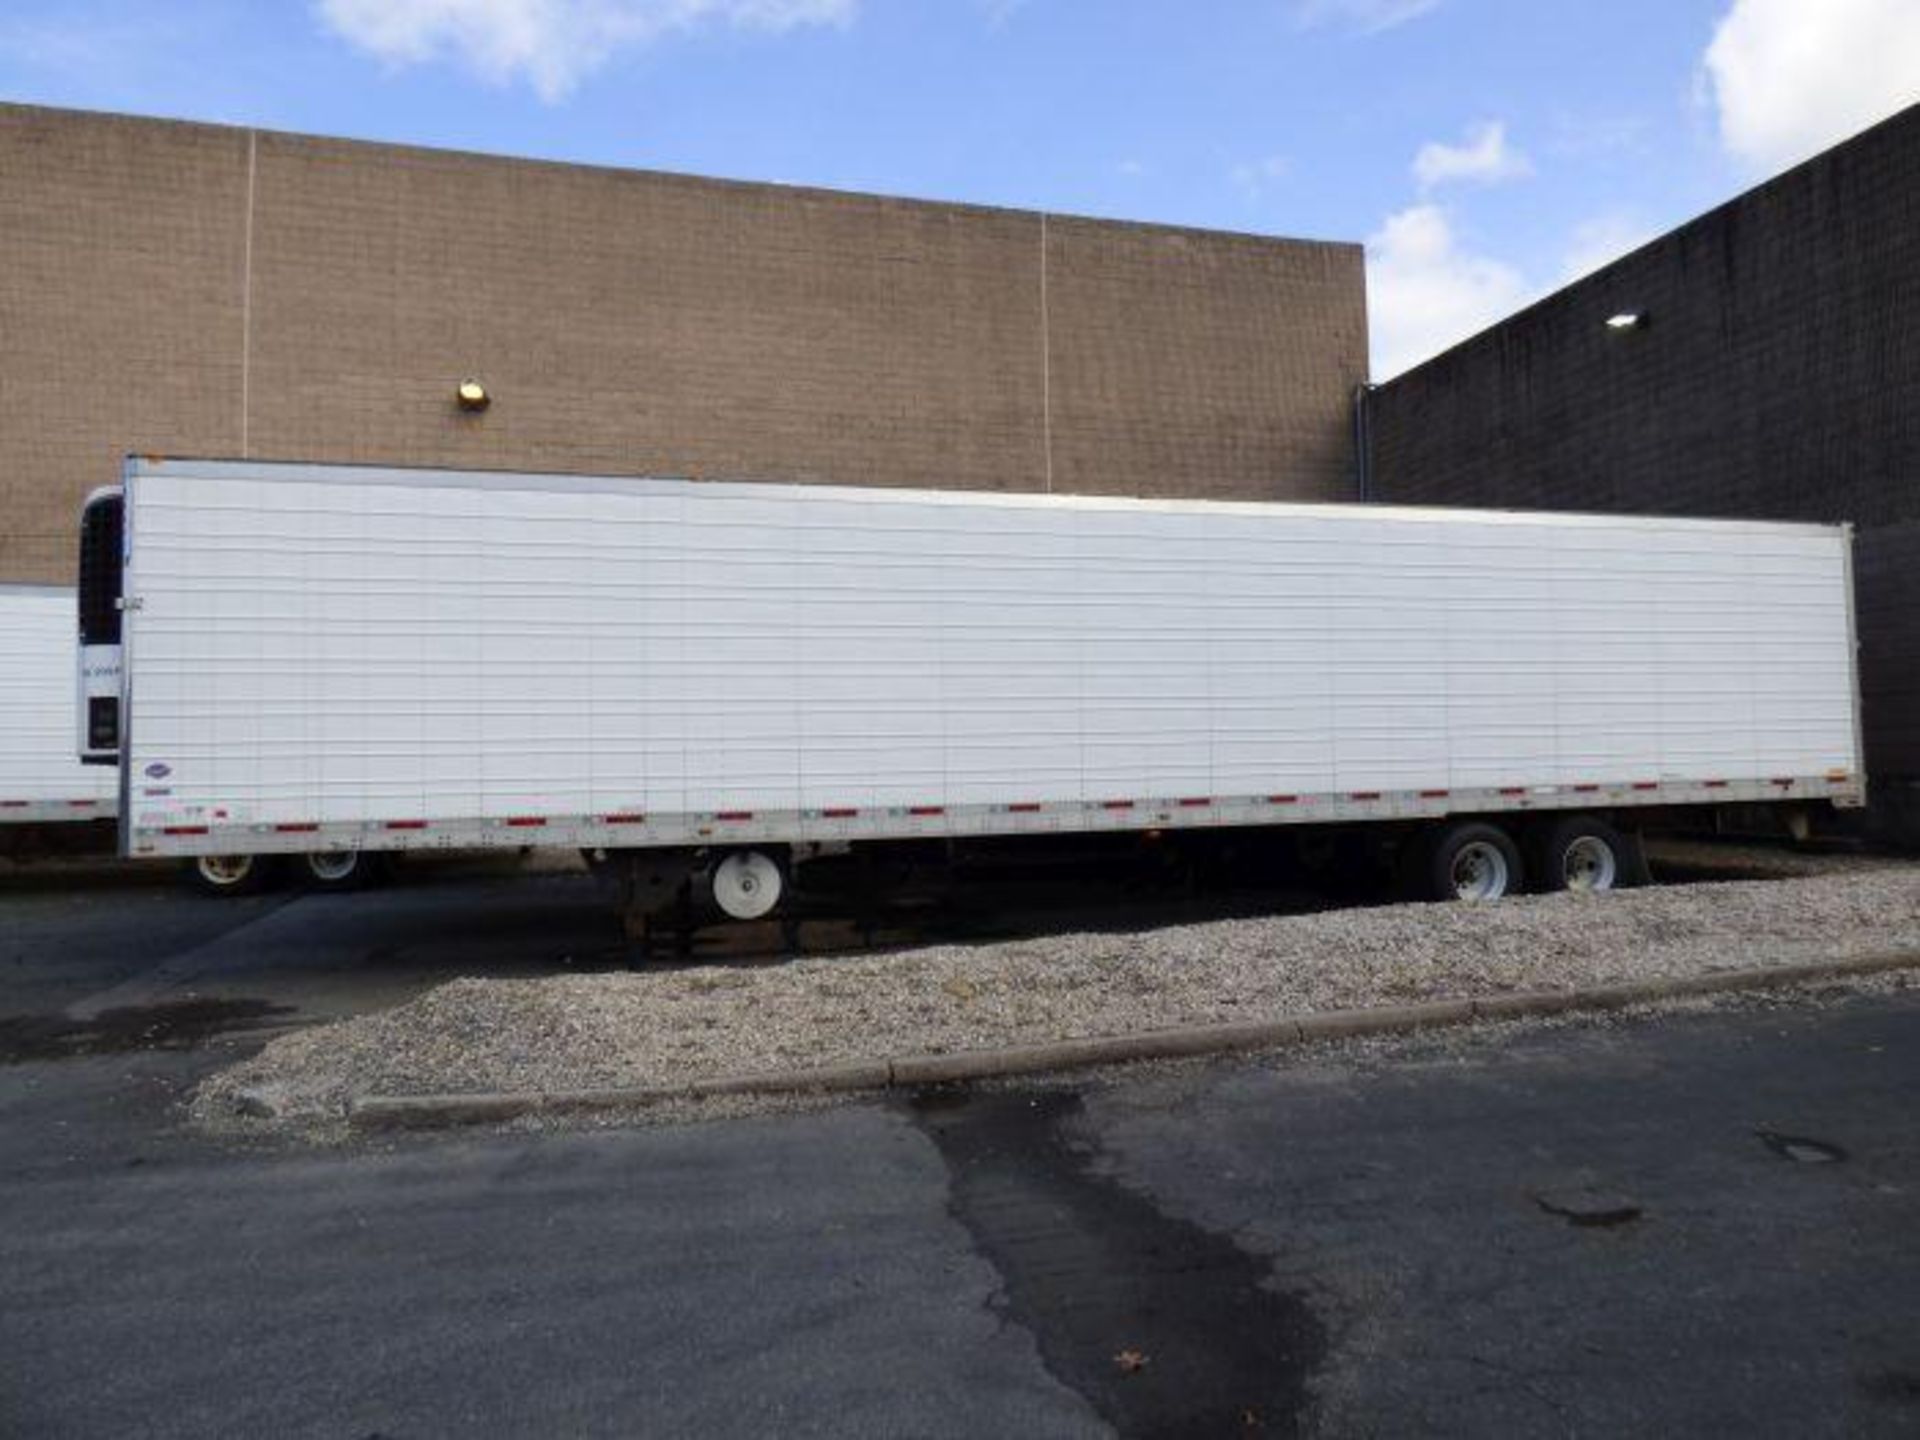 2013 Utility Reefer Trailer, 53 Foot - Image 6 of 13